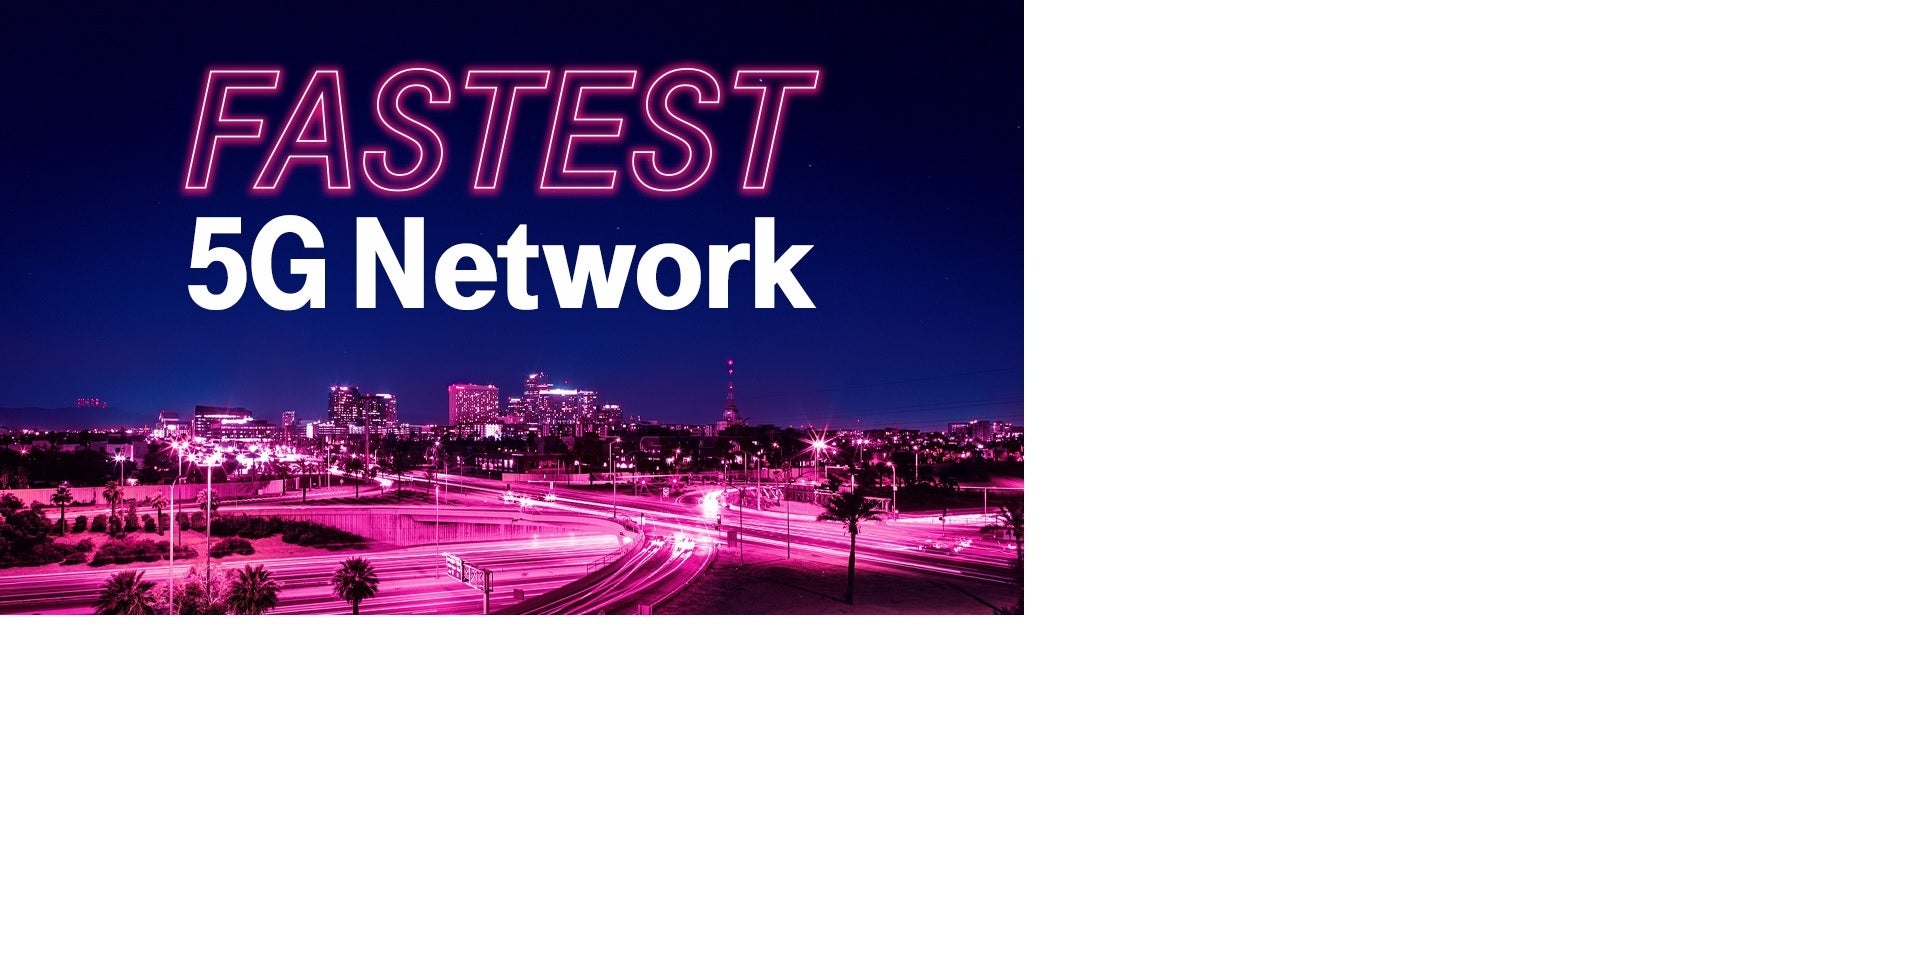 All U.S. carriers make claims about their 5G networks based on third-party data - T-Mobile not allowed to say that it is "the most reliable 5G network"